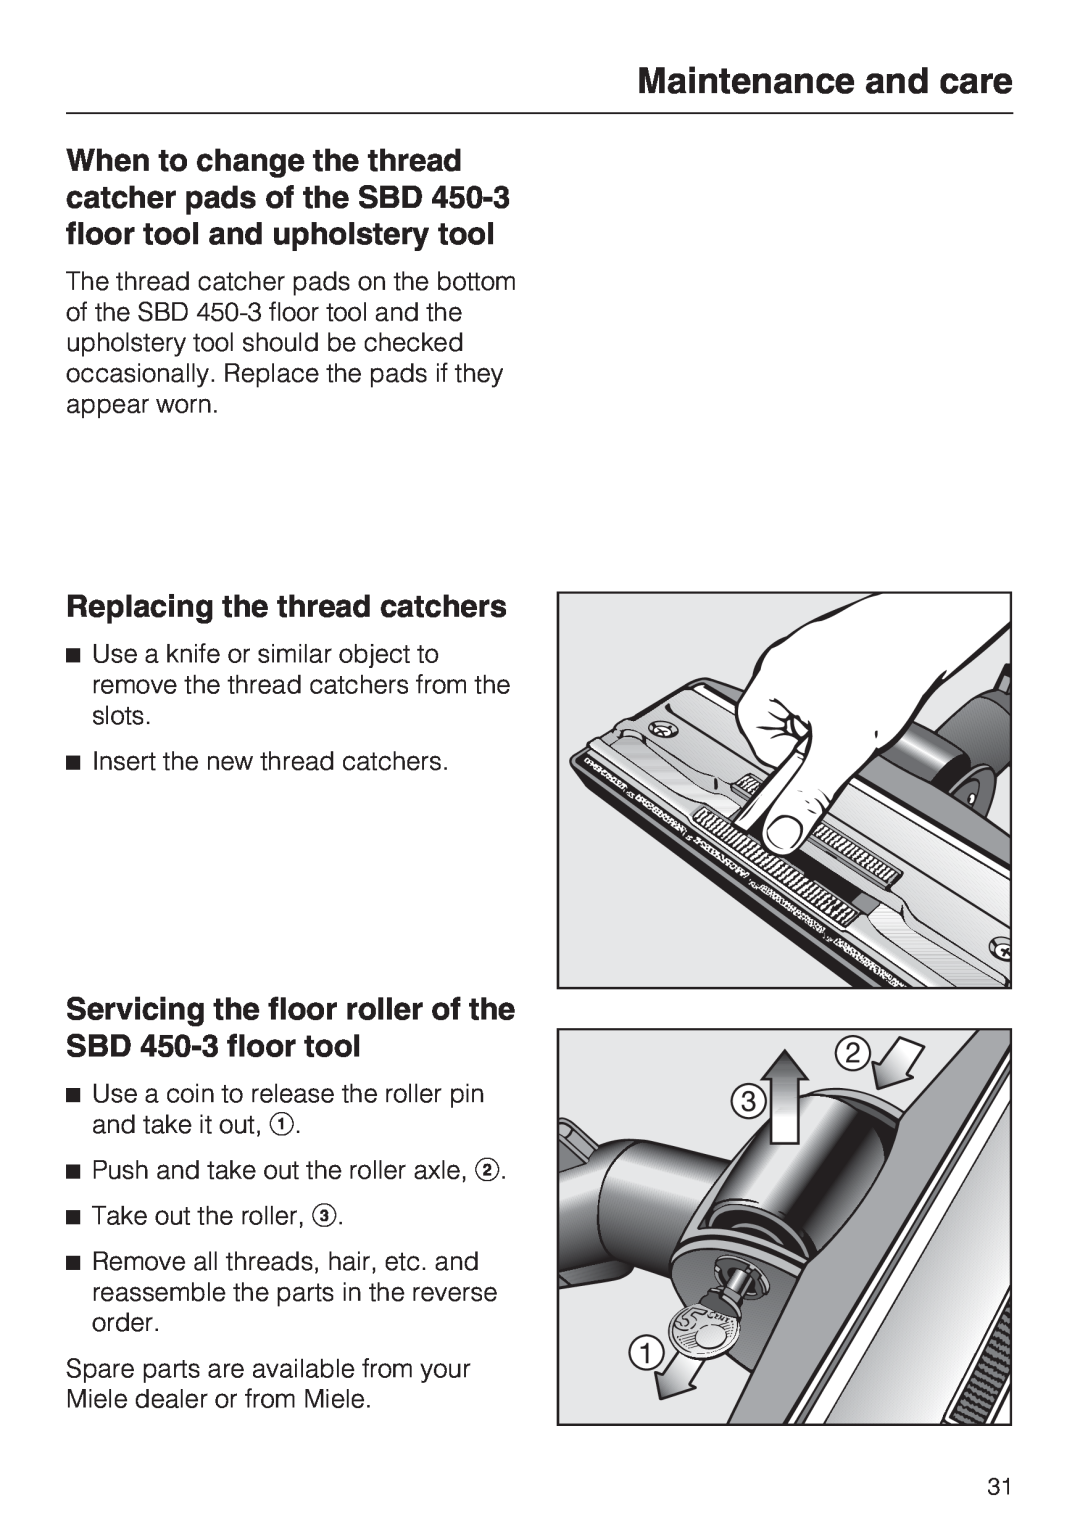 Miele S 4002 manual Maintenance and care, Replacing the thread catchers 